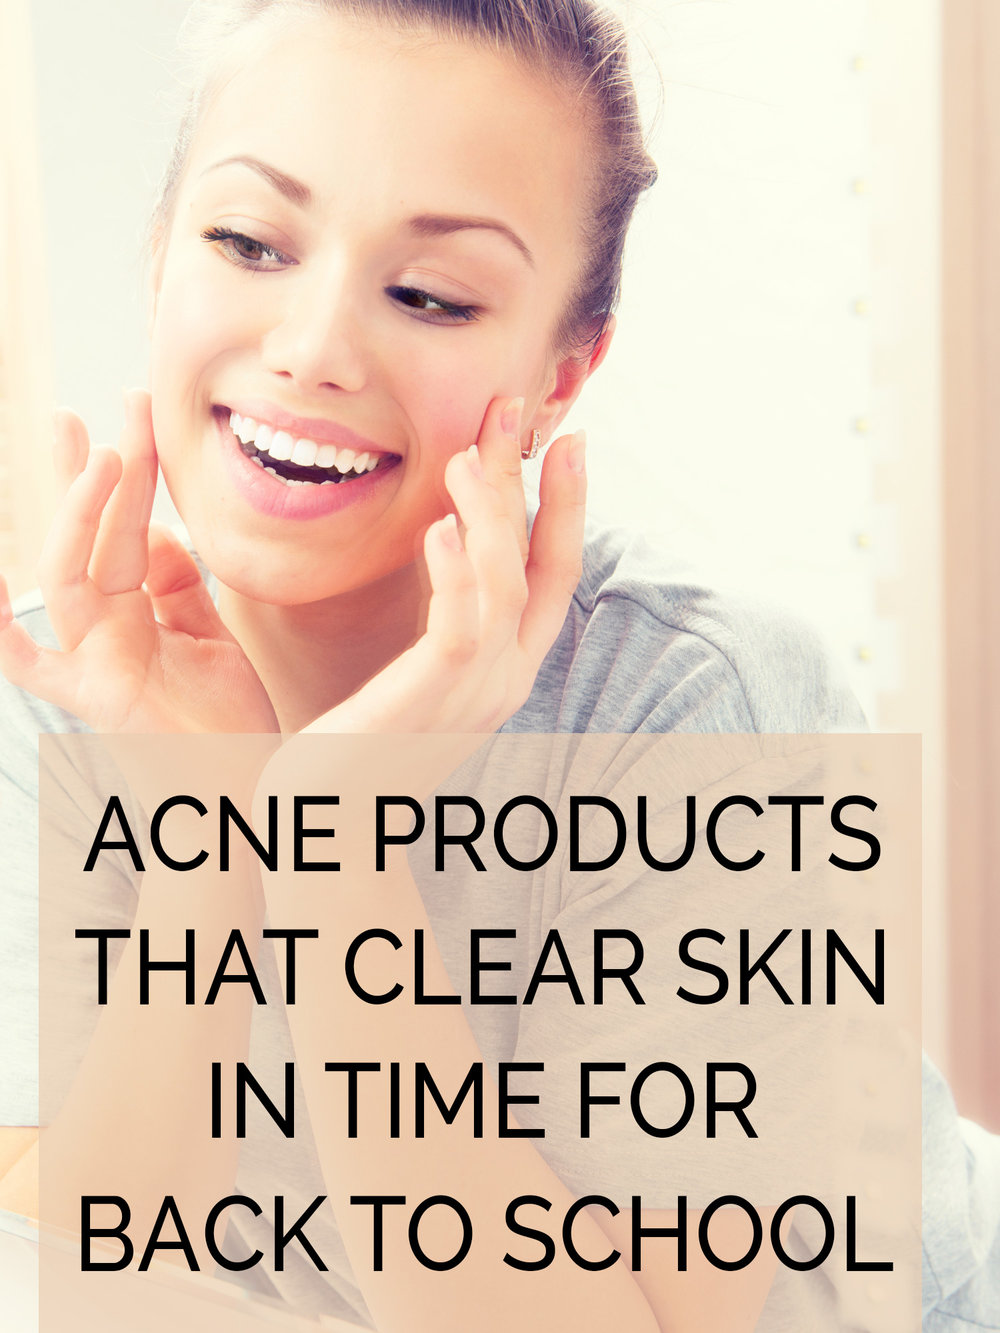 Going Back to School with Clear Skin: 10 Acne Products that Clear Skin in Time for Back to School